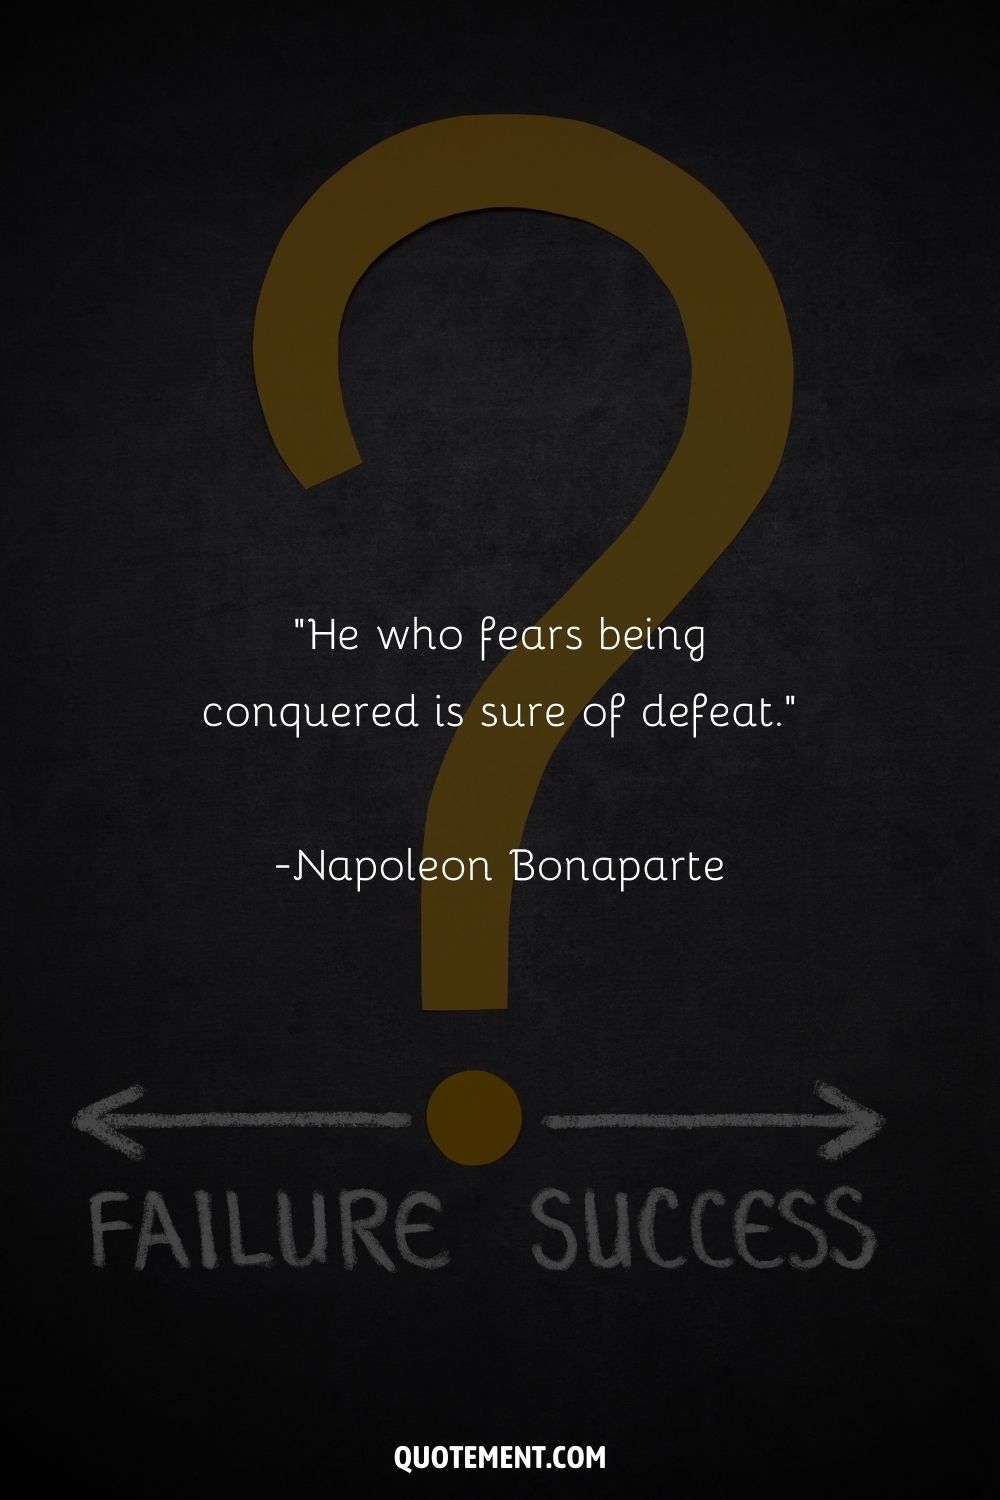 “He who fears being conquered is sure of defeat.” ― Napoleon Bonaparte